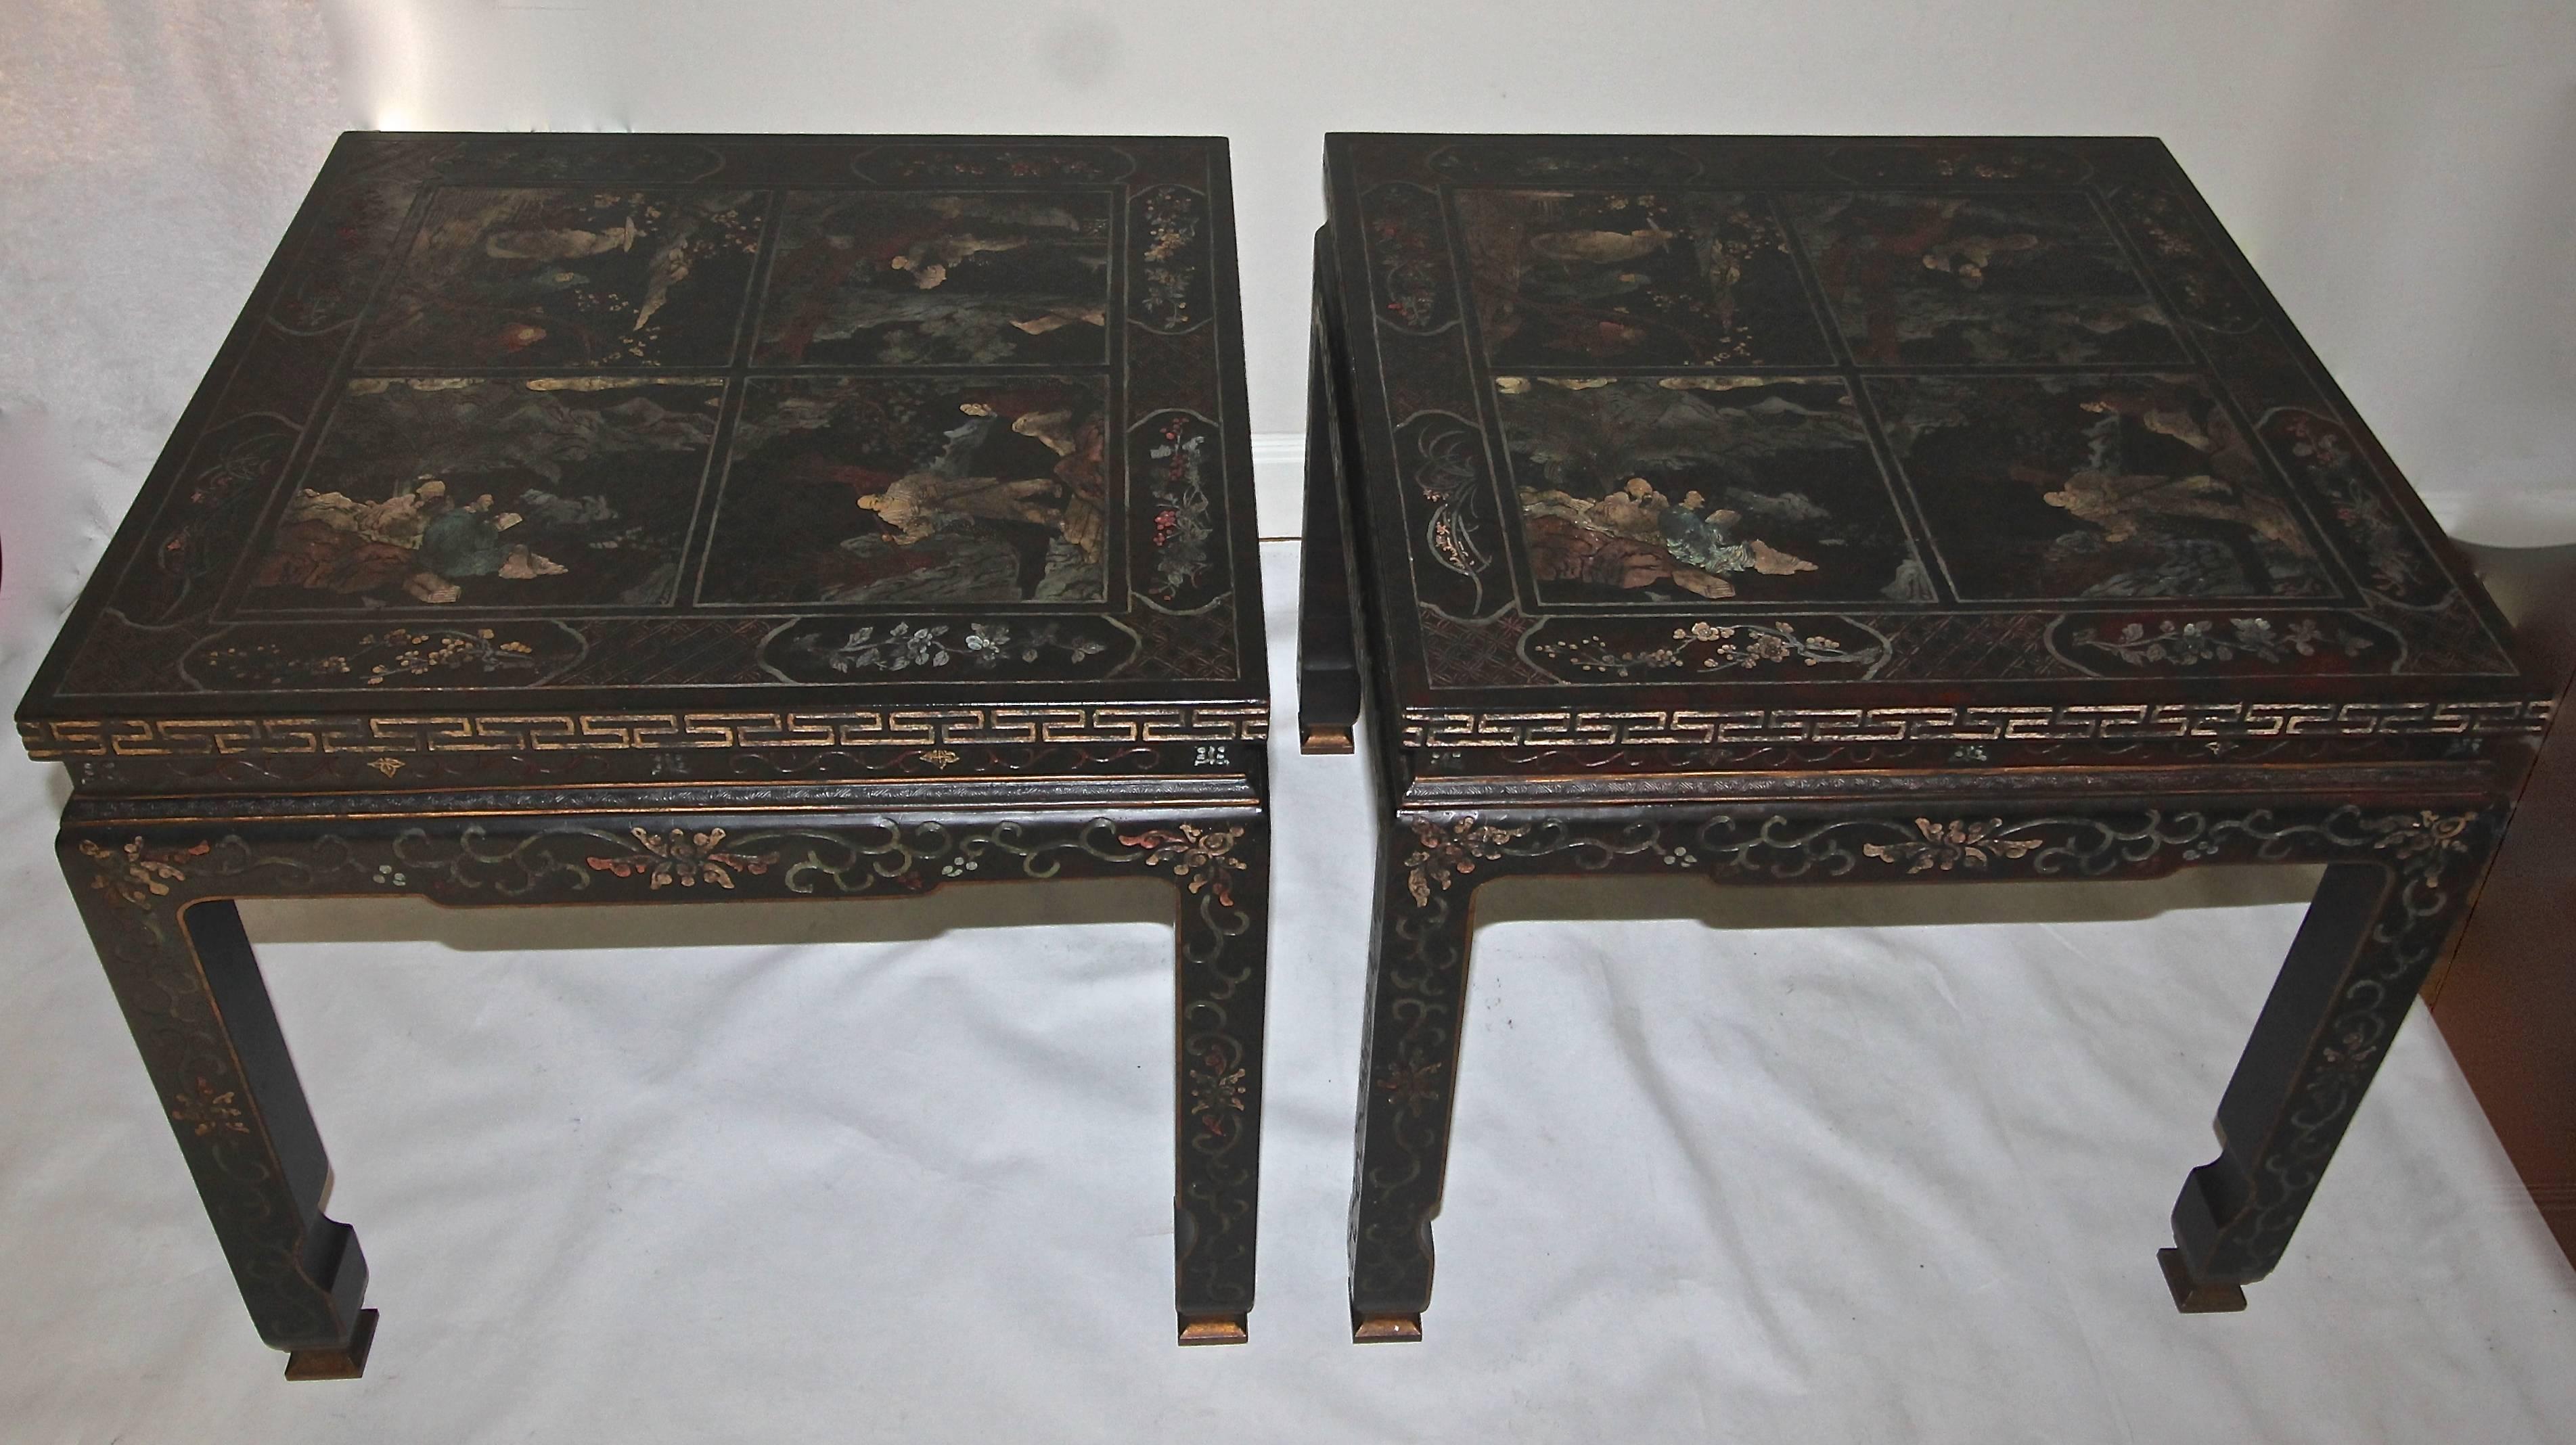 Exceptional pair of large-scale Asian inspired side or end tables with polychrome chinoiserie and Greek key motif by Baker Furniture. The top of each table features four chinoiserie scenes that are placed so as to be enjoyed from all sides. Tables